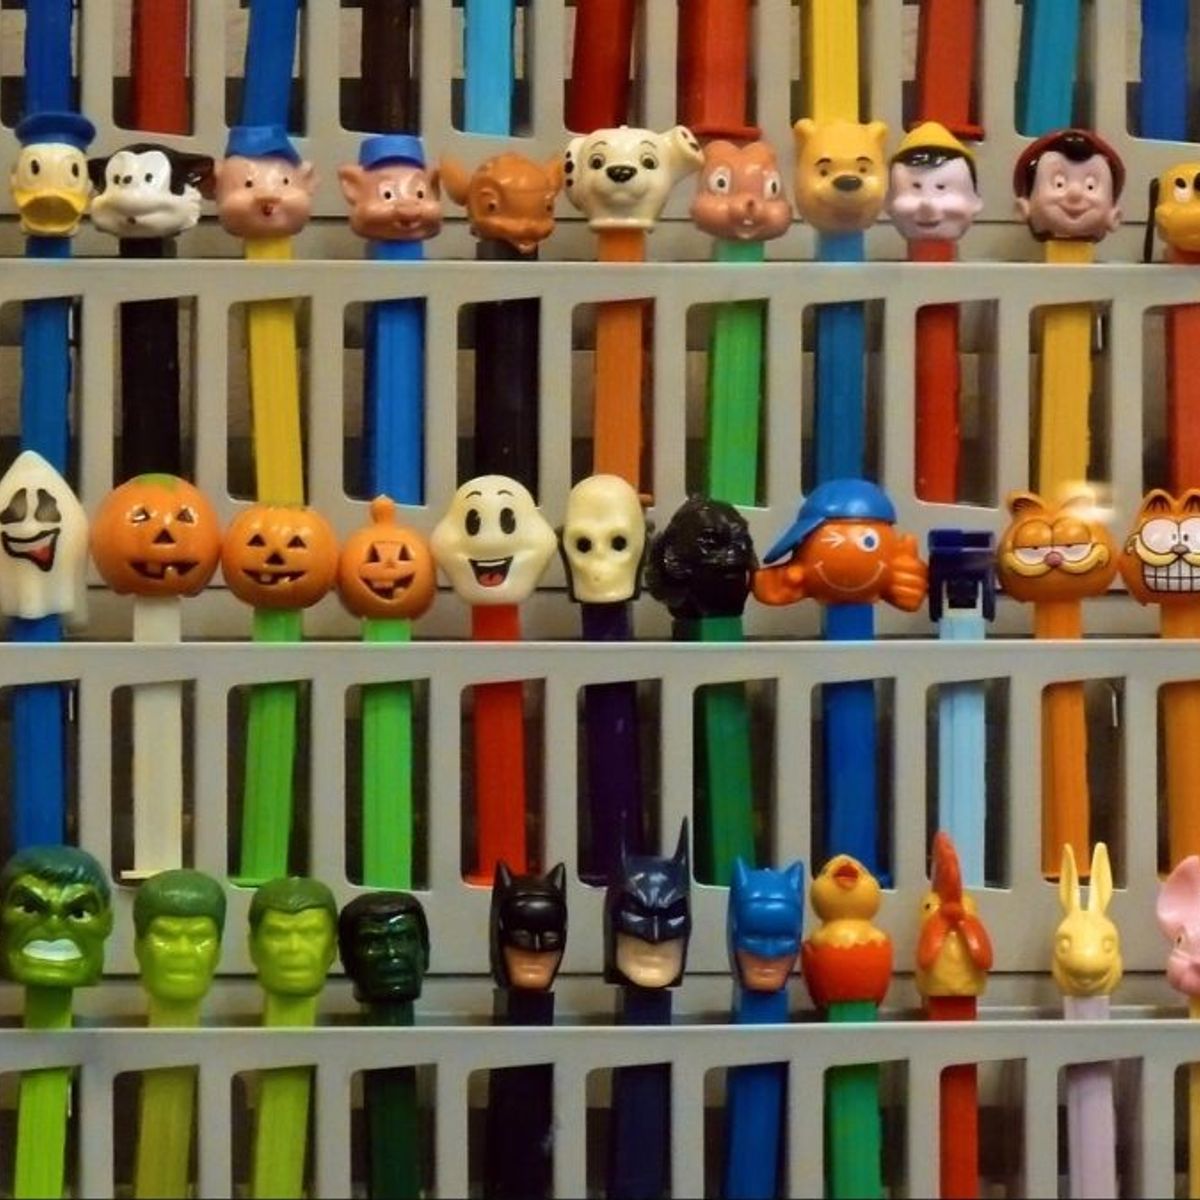 Pez dispenser loading trick goes viral on TikTok — but is it real? - Dexerto